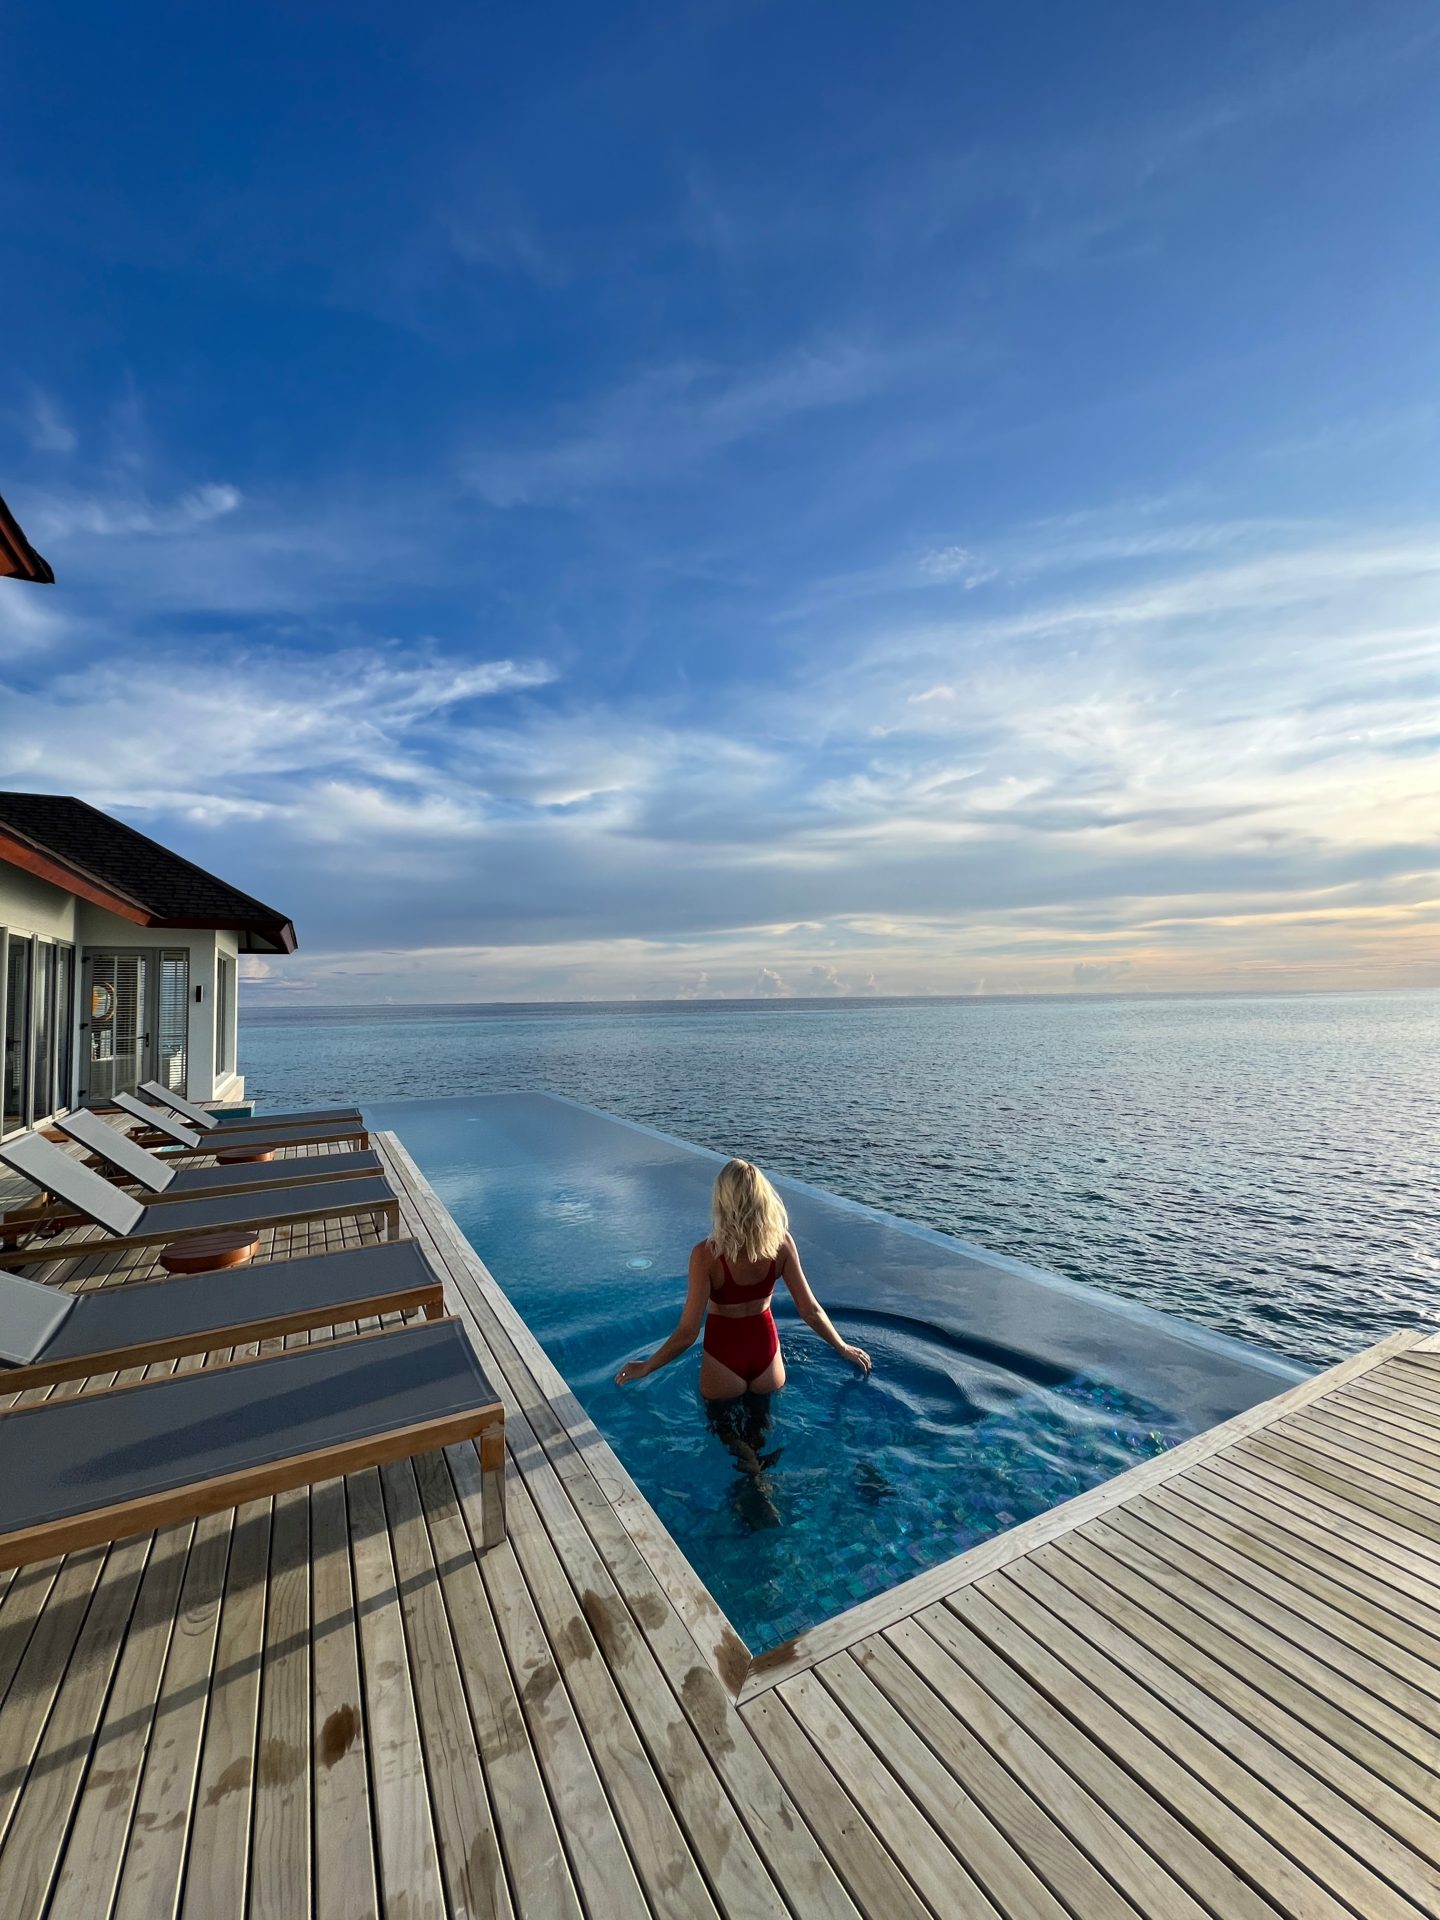 Zanna van Dijk standing in an infinity pool in the Maldives looking out to sea